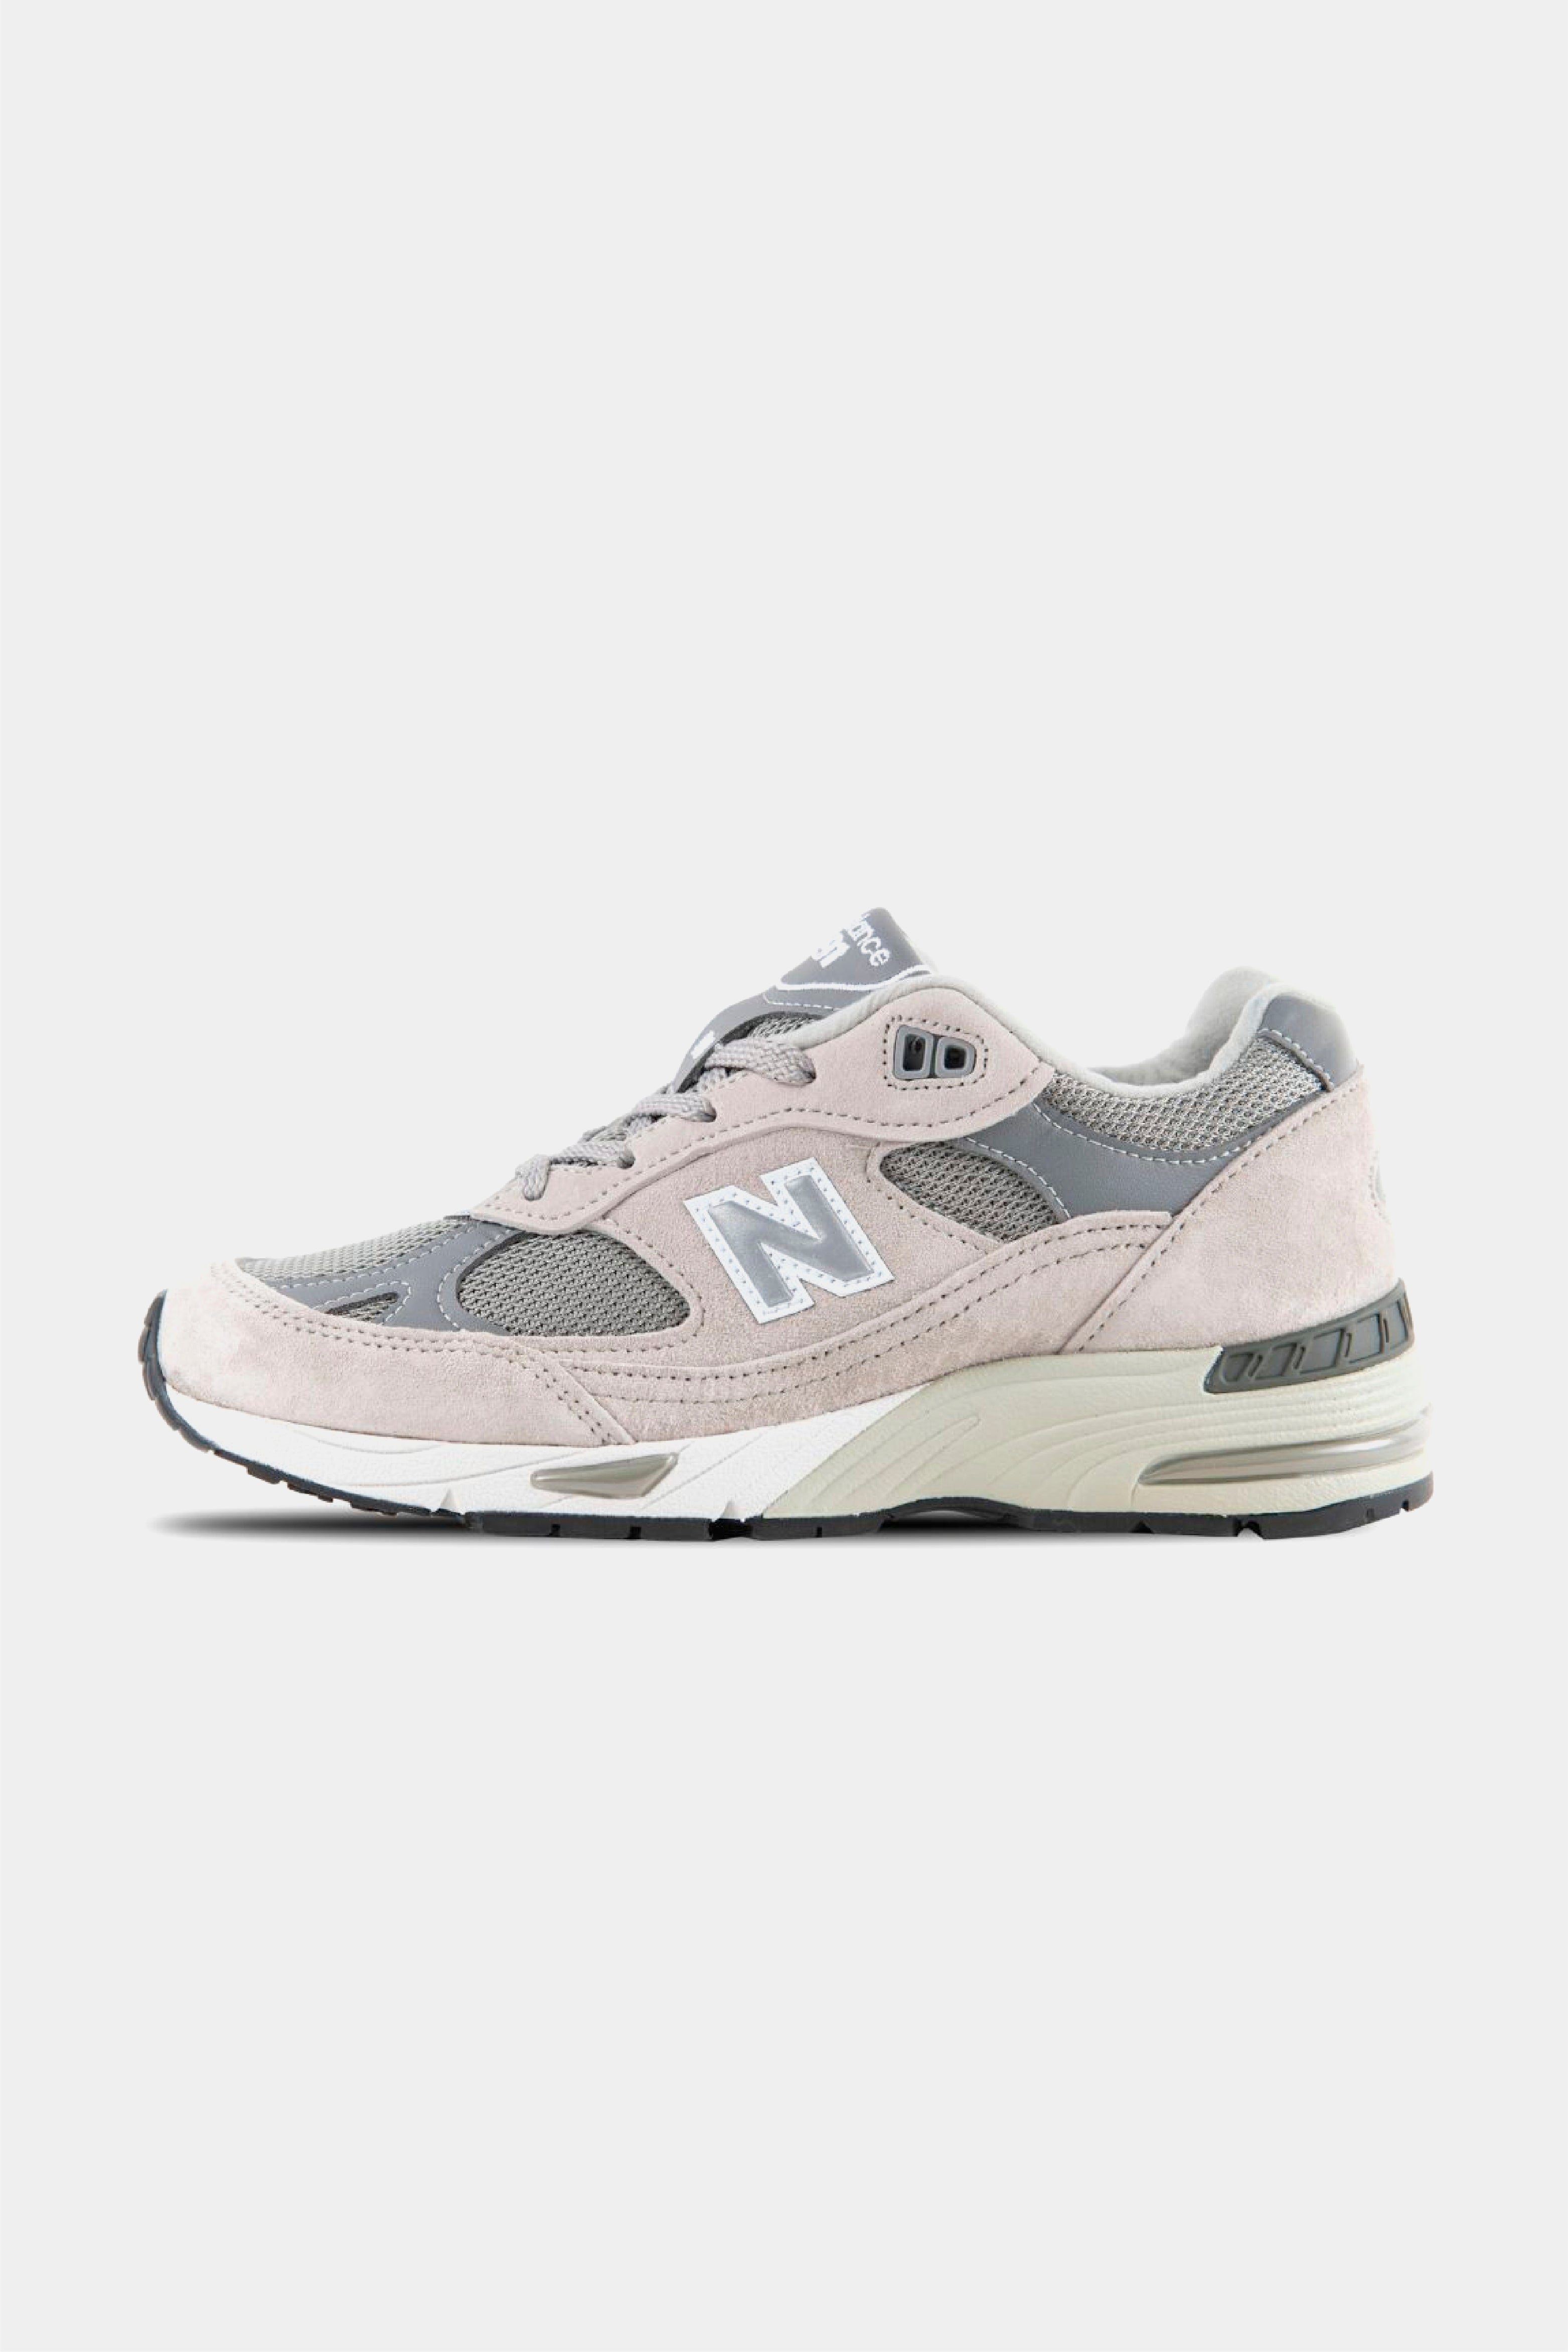 Selectshop FRAME - NEW BALANCE 991 Made in England "Grey White" Footwear Concept Store Dubai